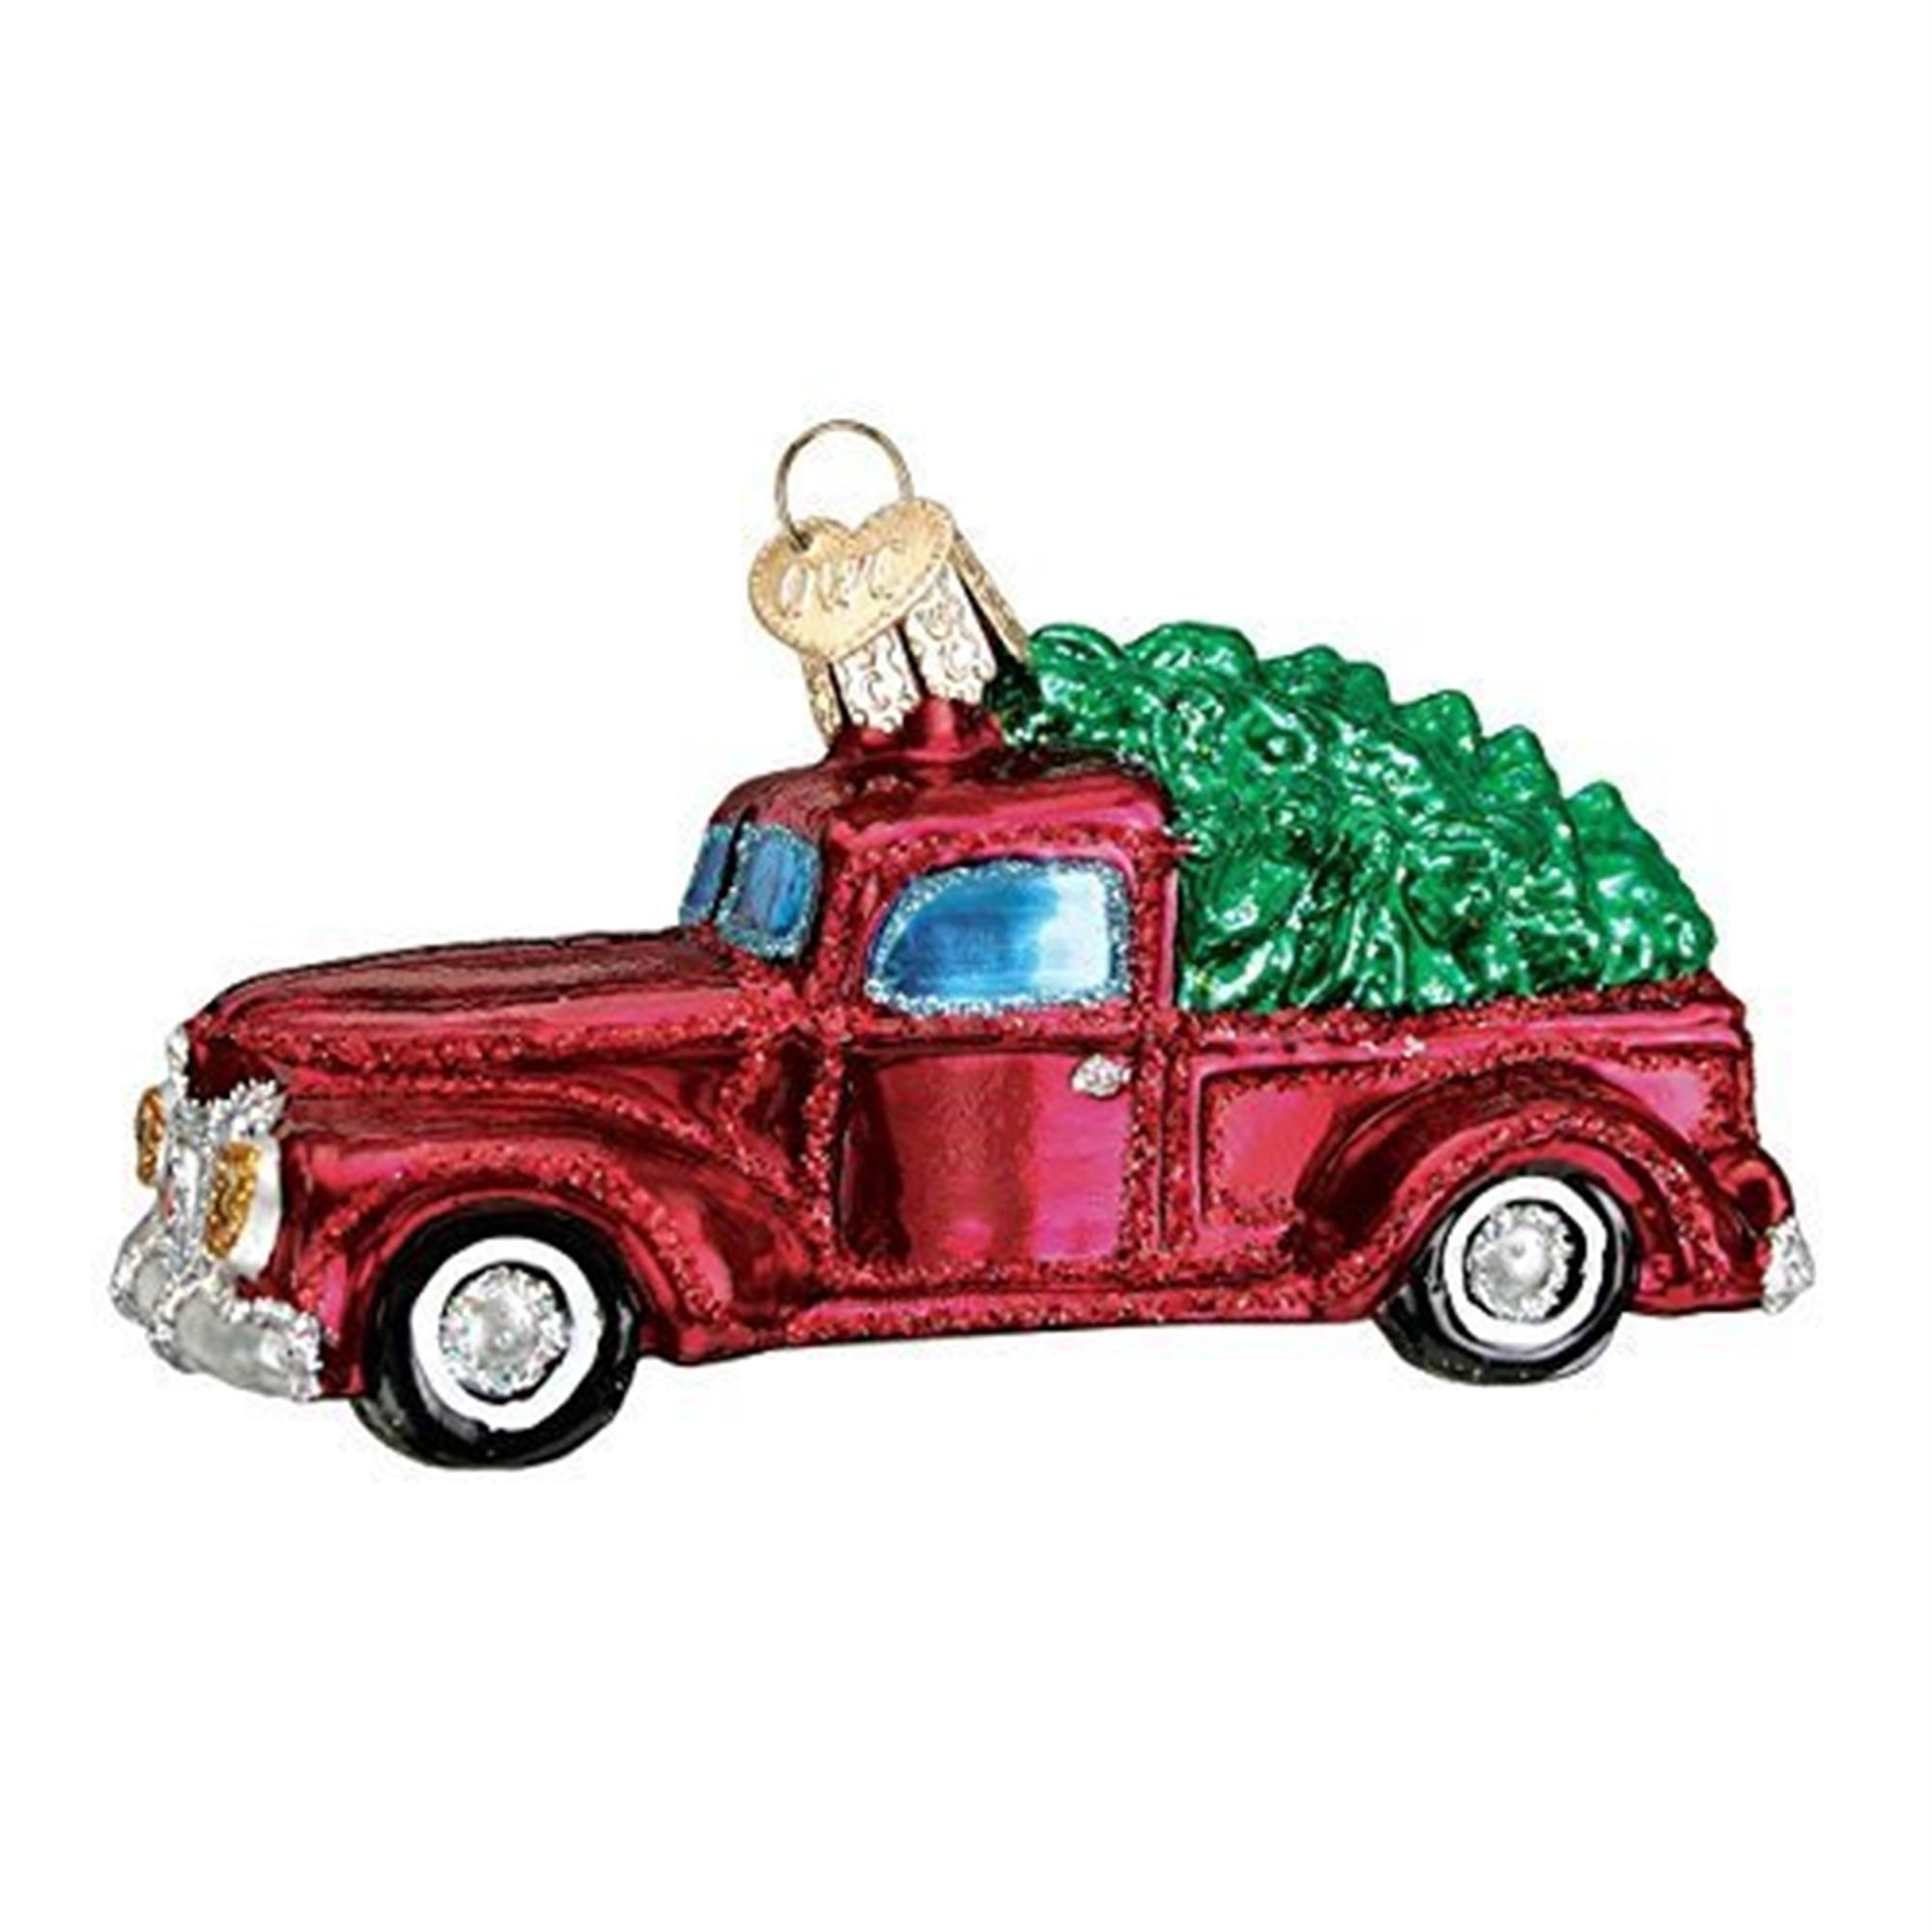 Glass RED PICKUP TRUCK Christmas Tree Ornament 4.25" Long Primitives by Kathy 